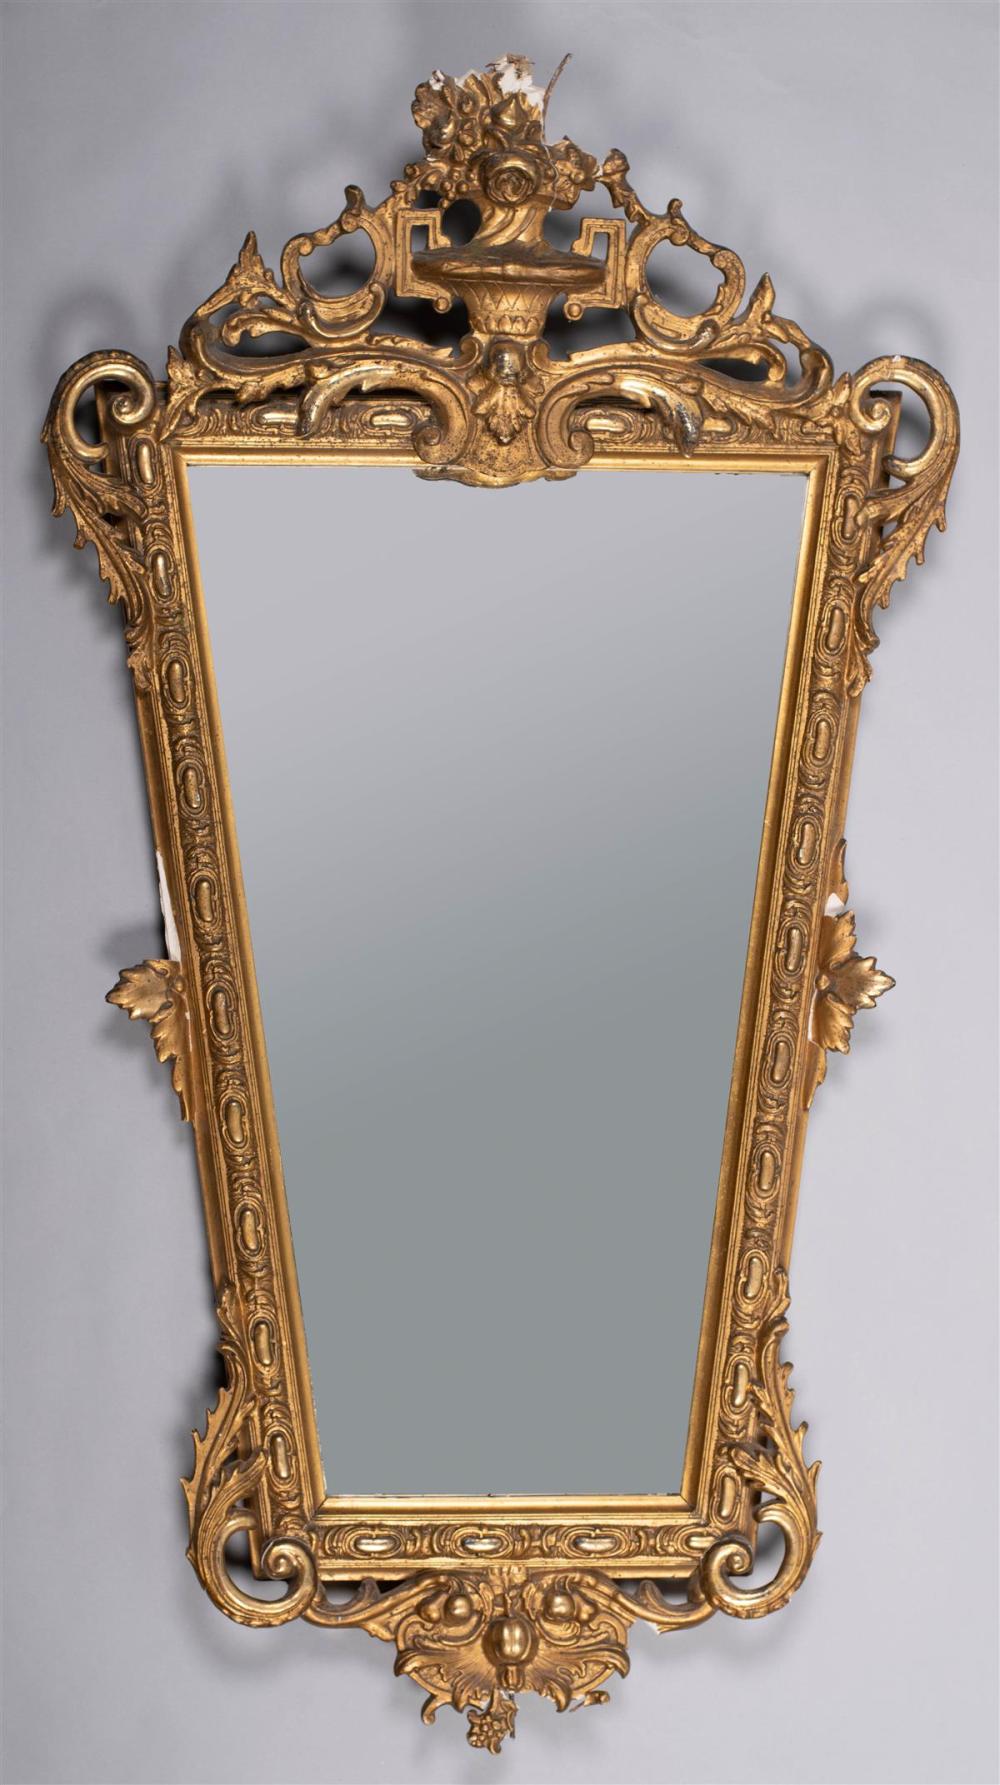 NEOCLASSICAL STYLE GILT QUADRILATERAL